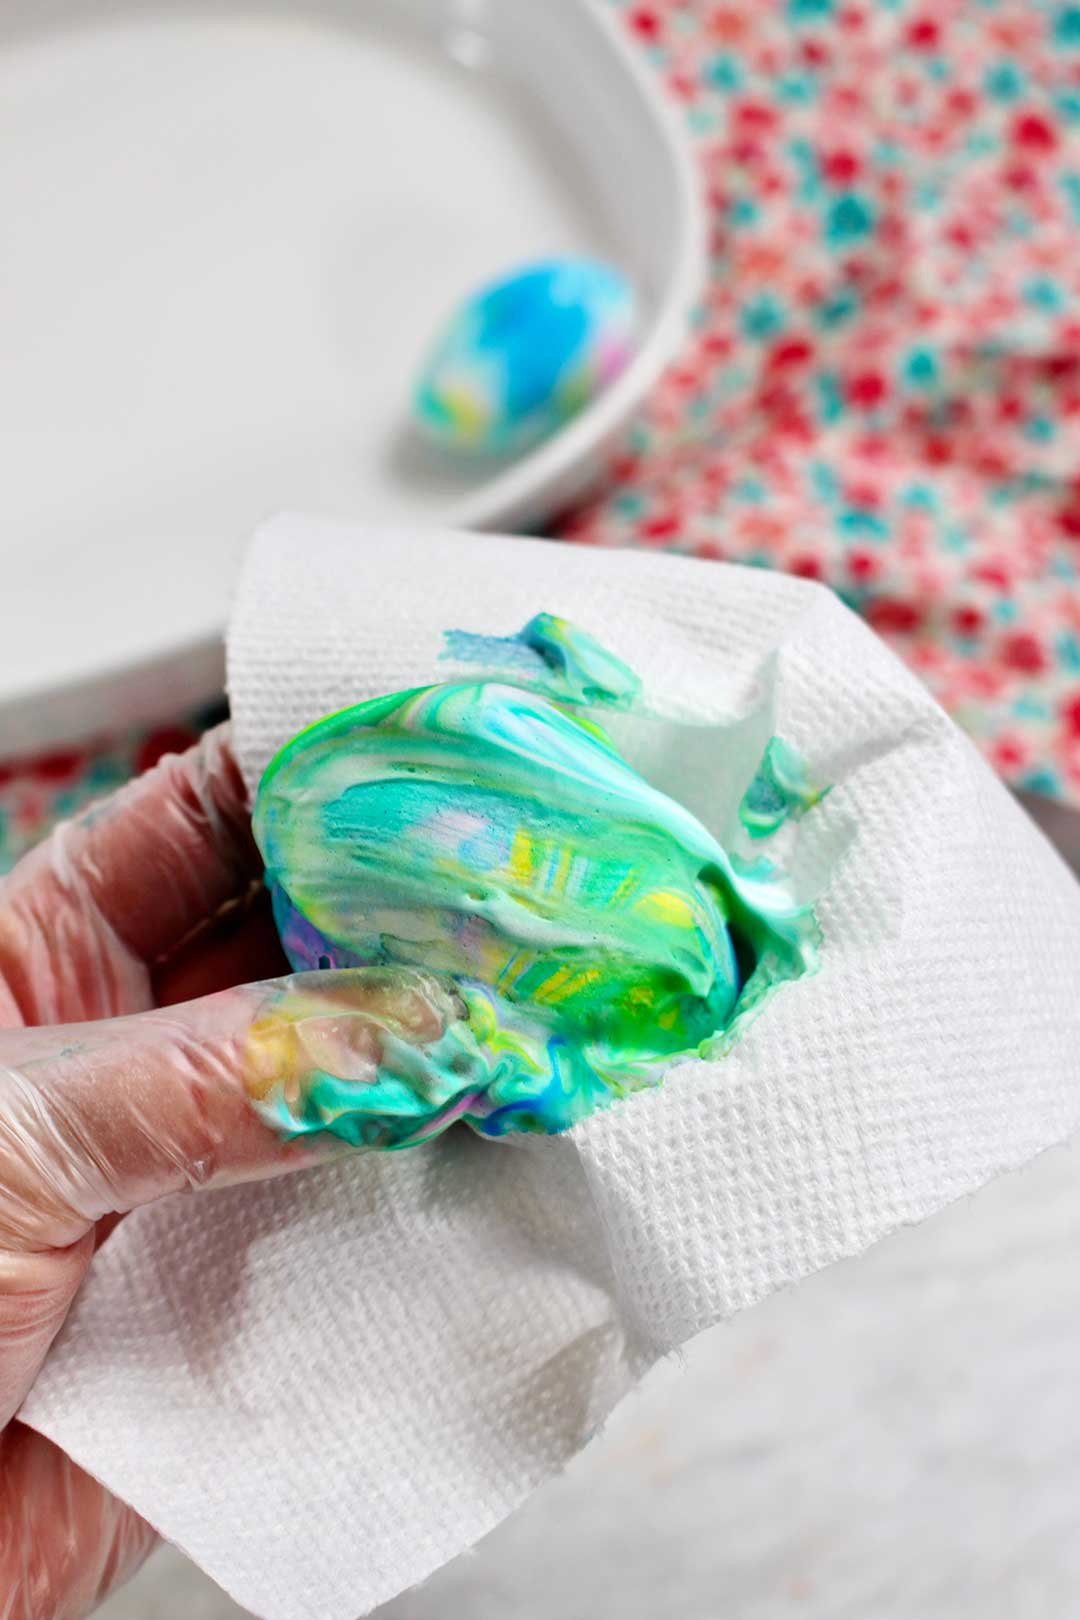 An egg covered in yellow, green, blue, and pink swirled shaving cream, being wiped off by a paper towel.